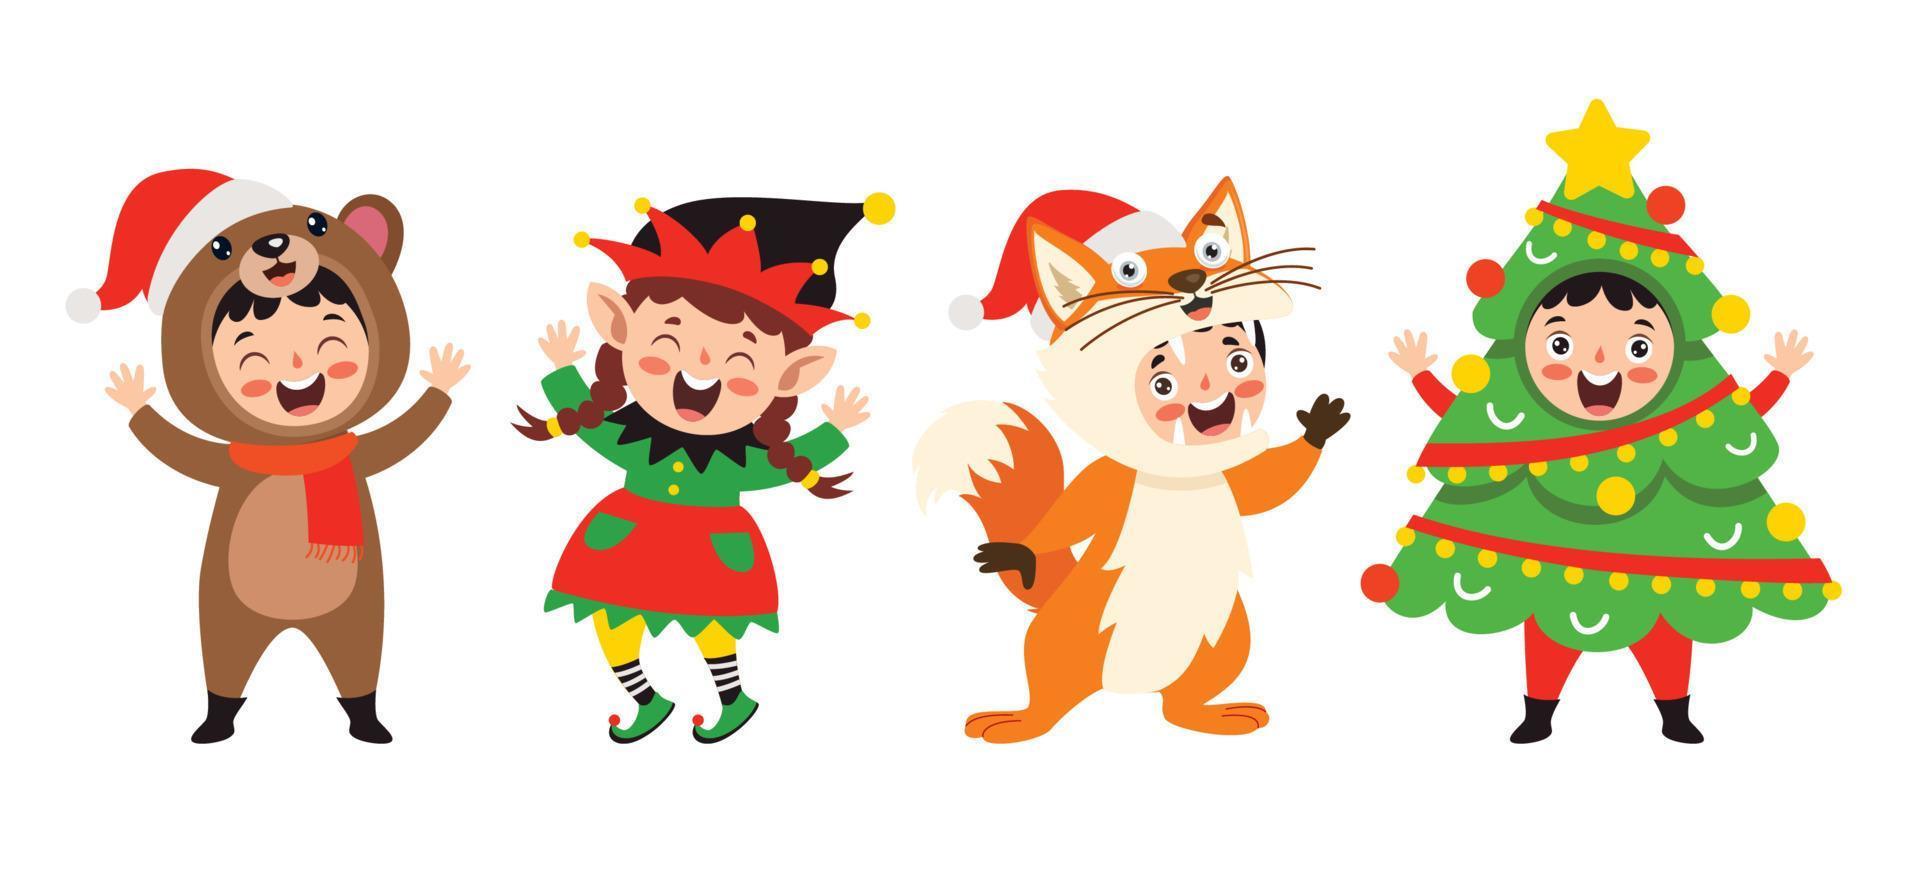 Children Wearing Costumes In Christmas Theme vector